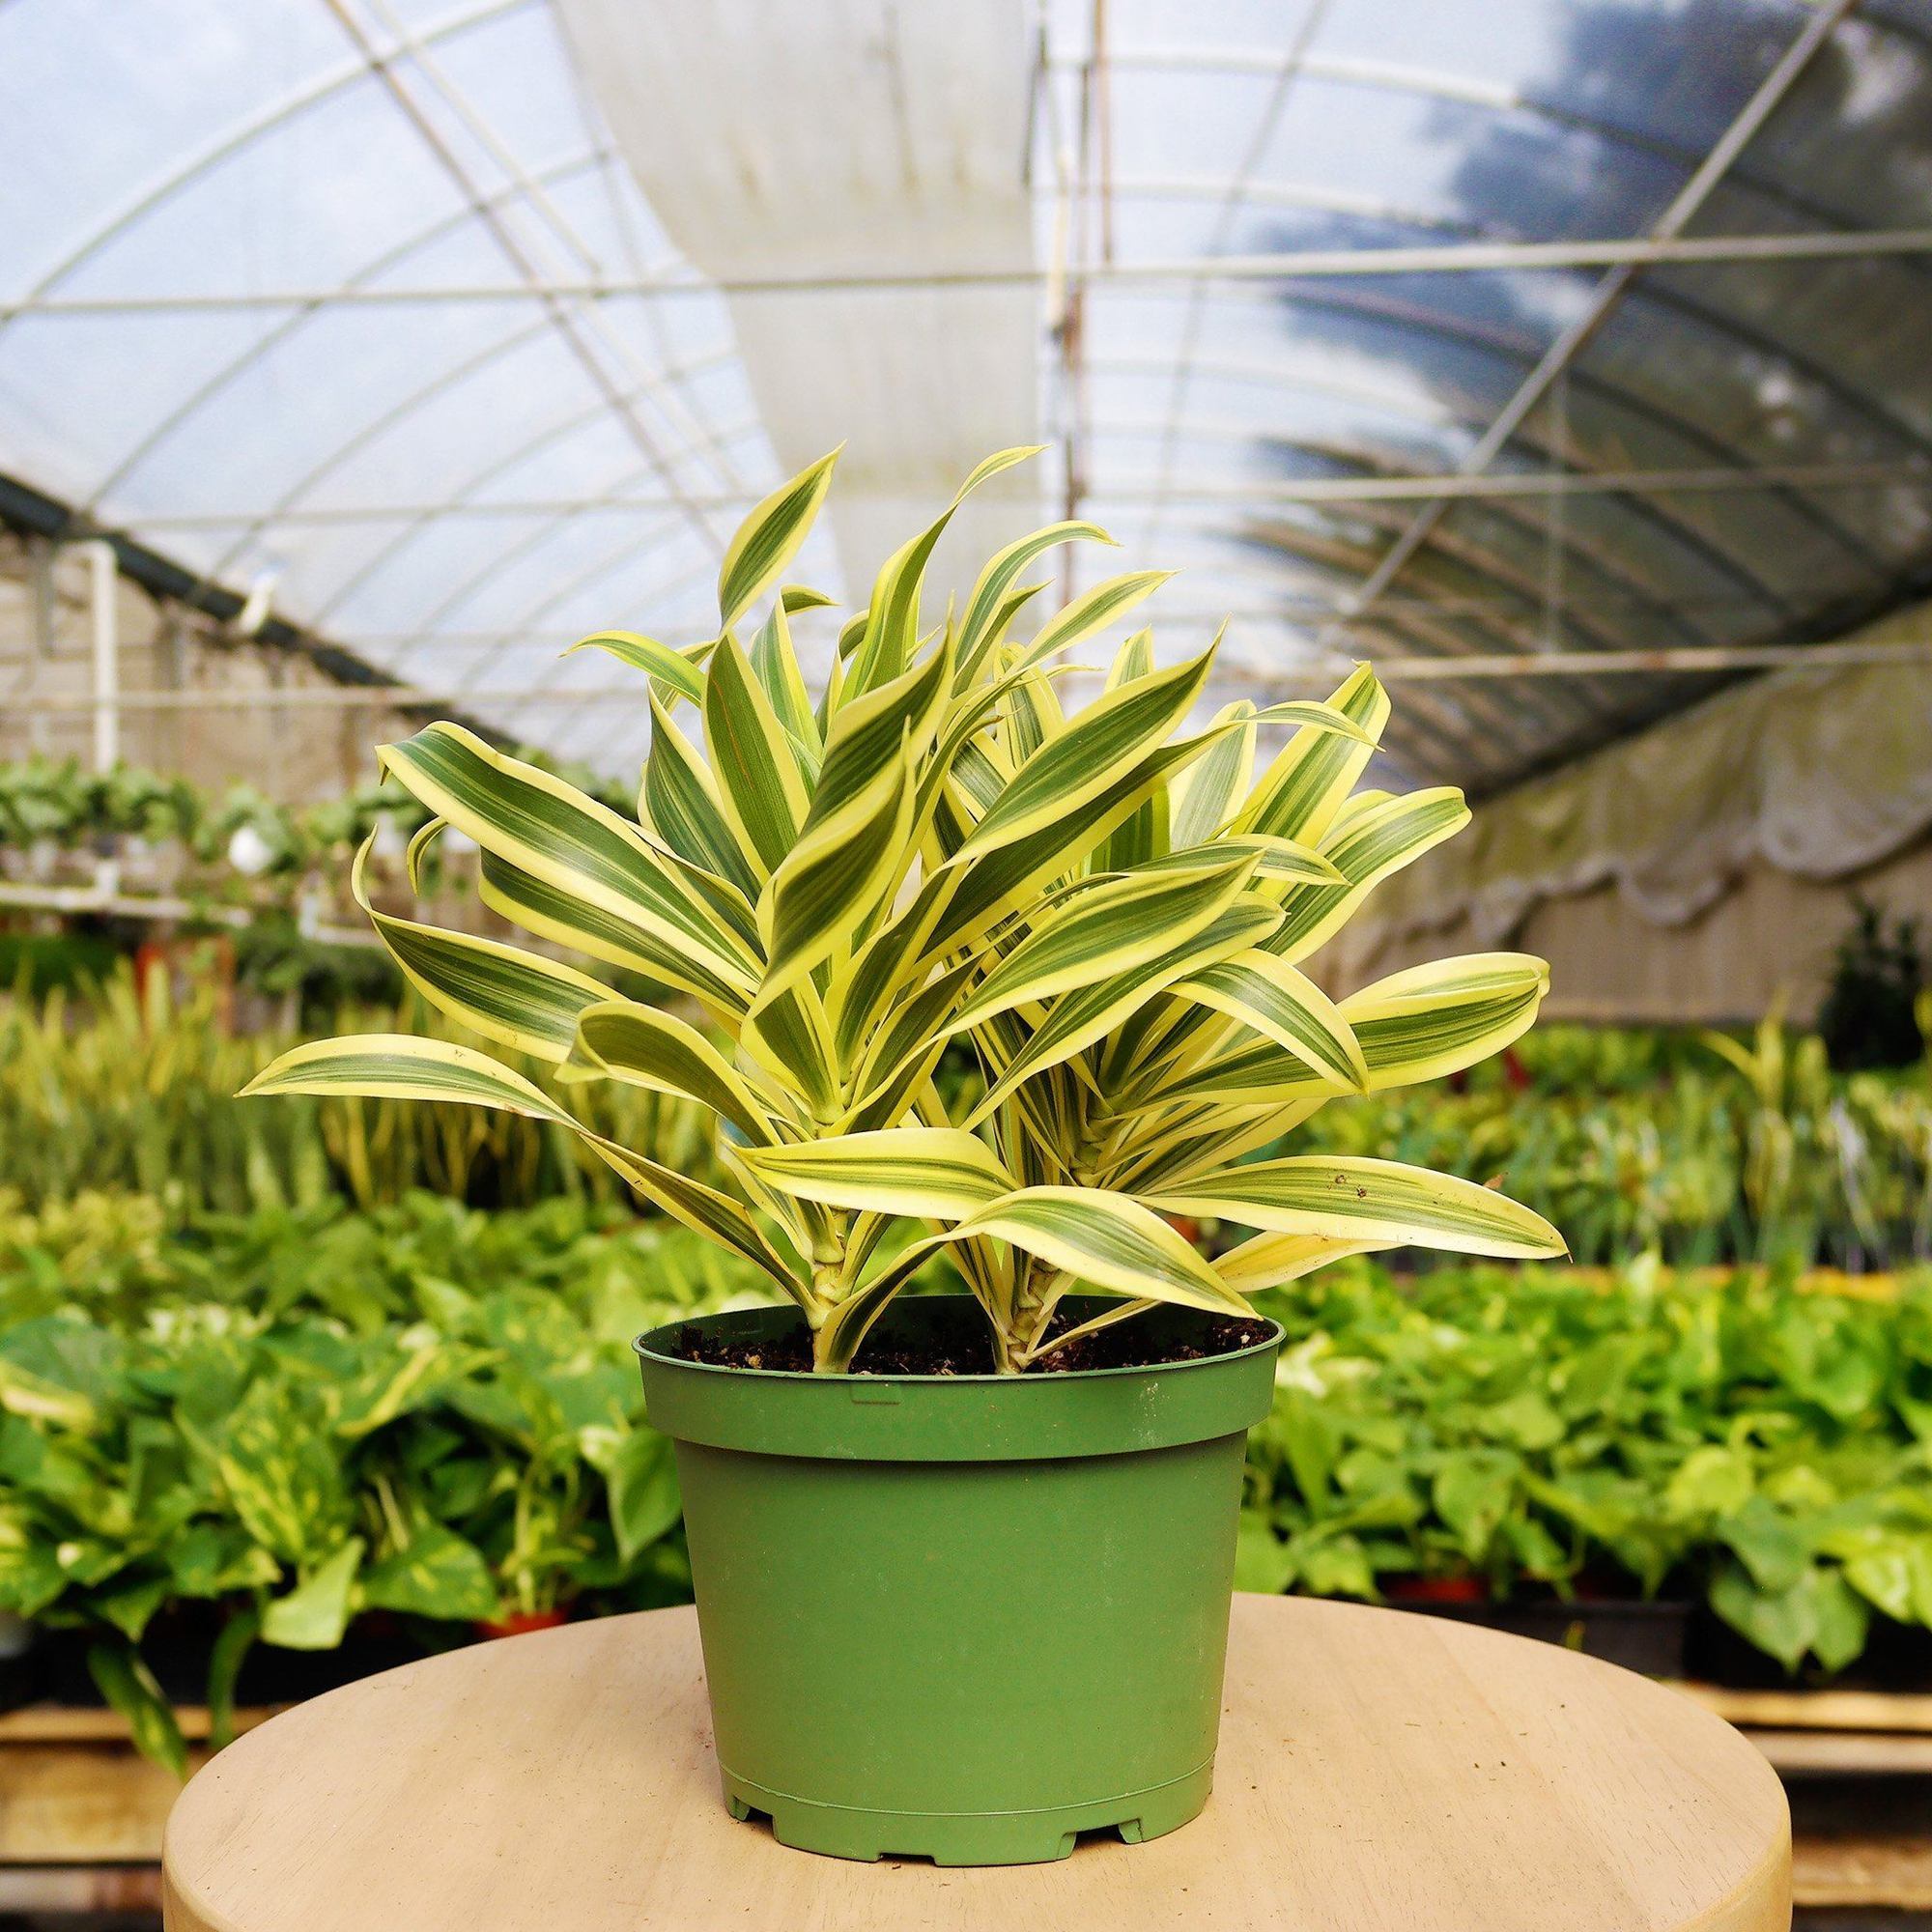 A plant in a greenhouse.